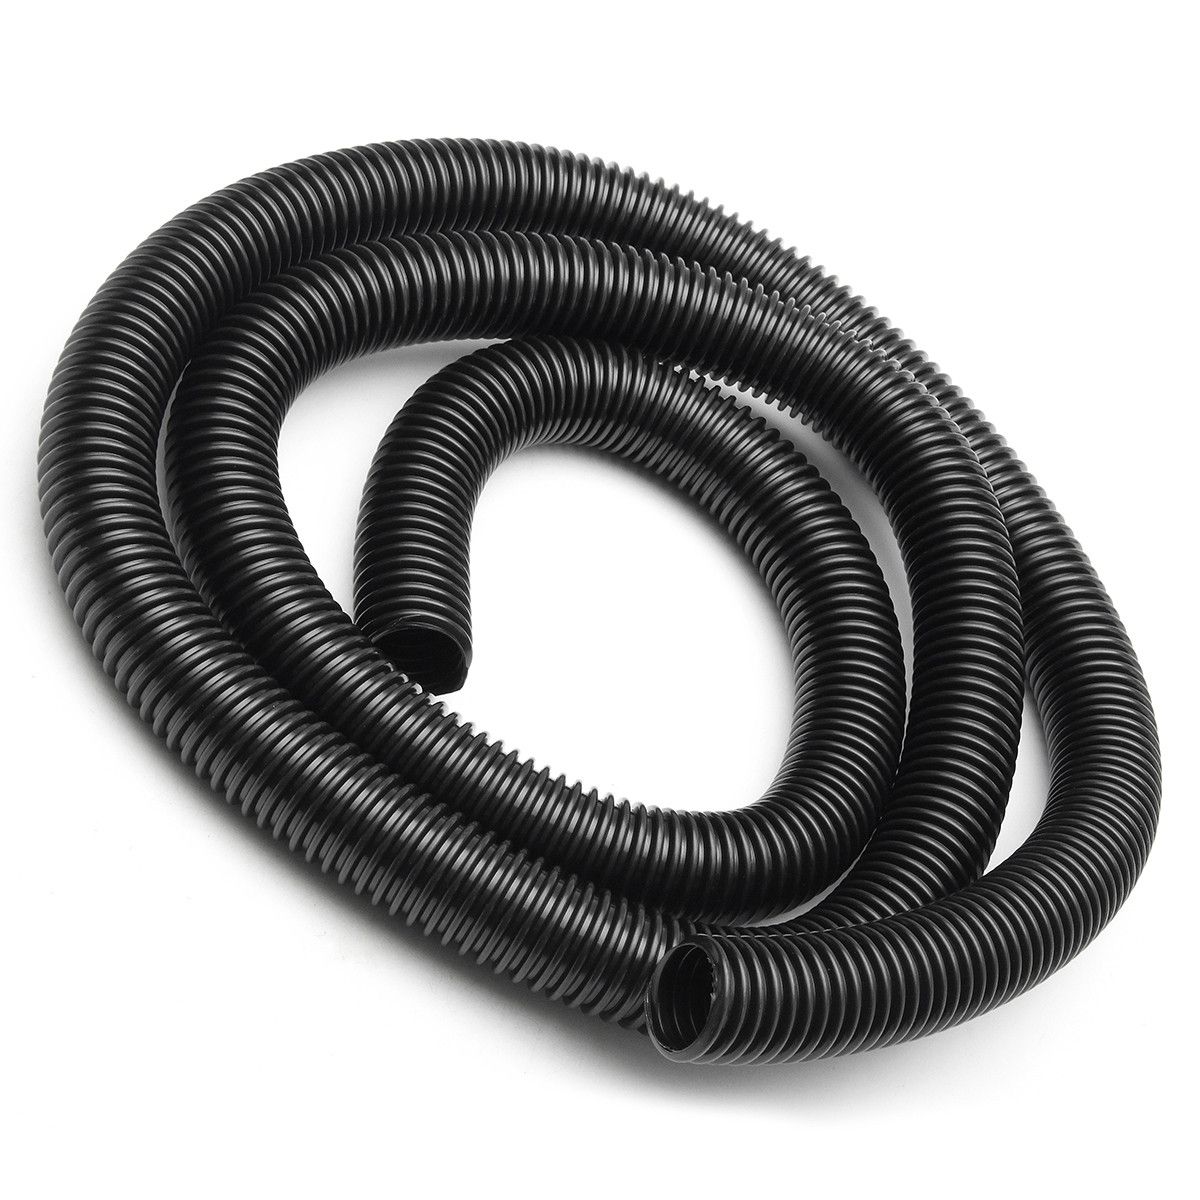 25mtimes32mm-EVA-Universal-Cleaner-Hose-Bellows-Straws-Vacuum-Cleaner-Parts-1088811